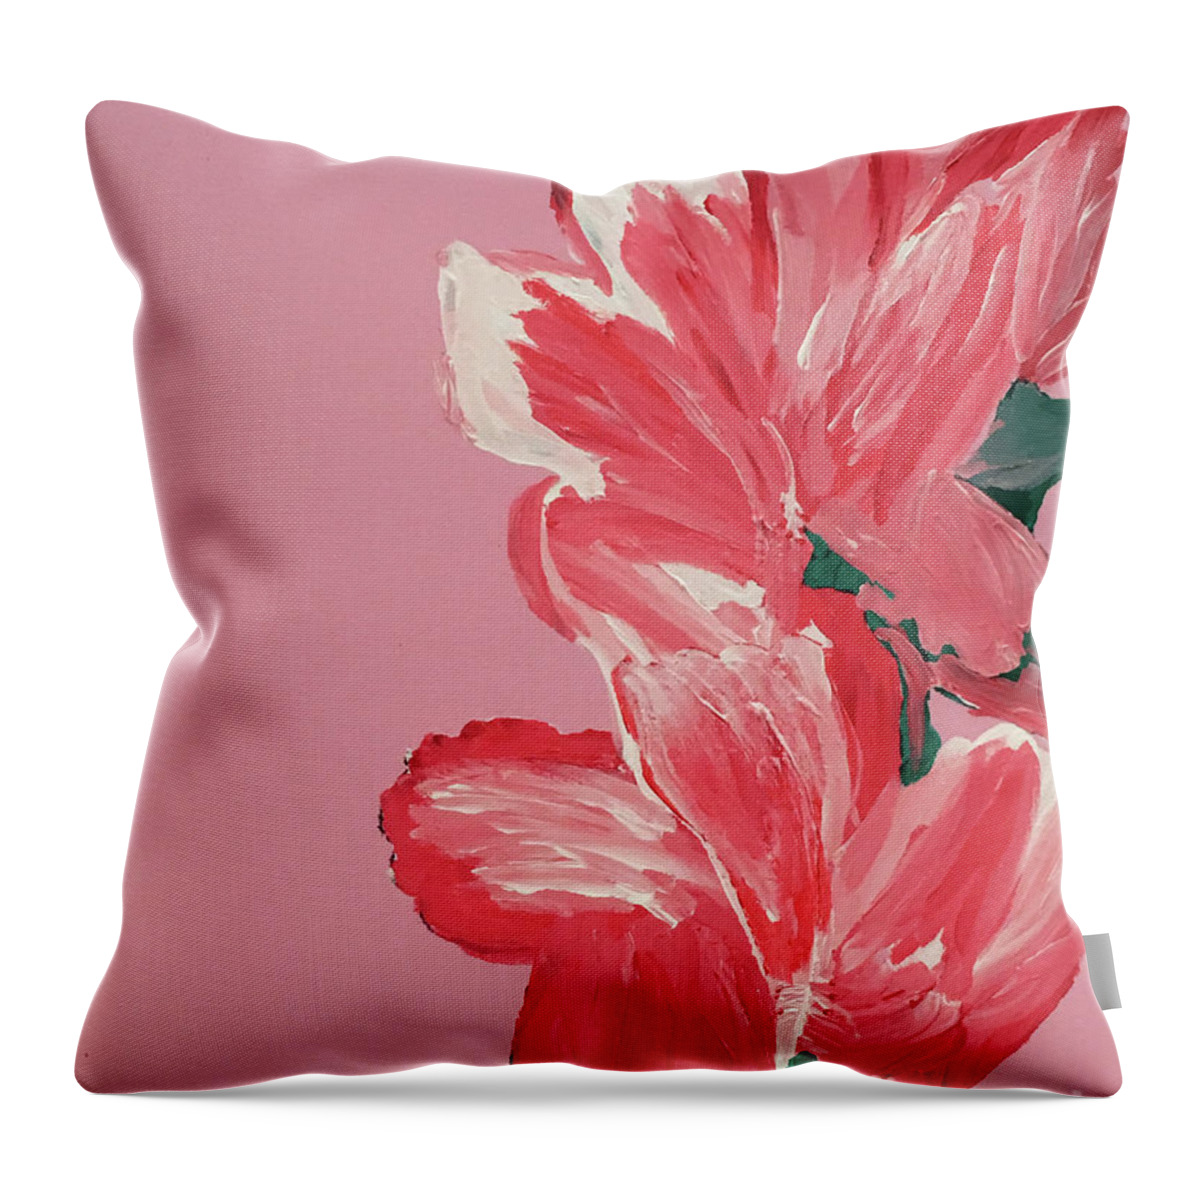 Hibiscuses Throw Pillow featuring the painting Pink Hibiscus Flowers by Karen Nicholson